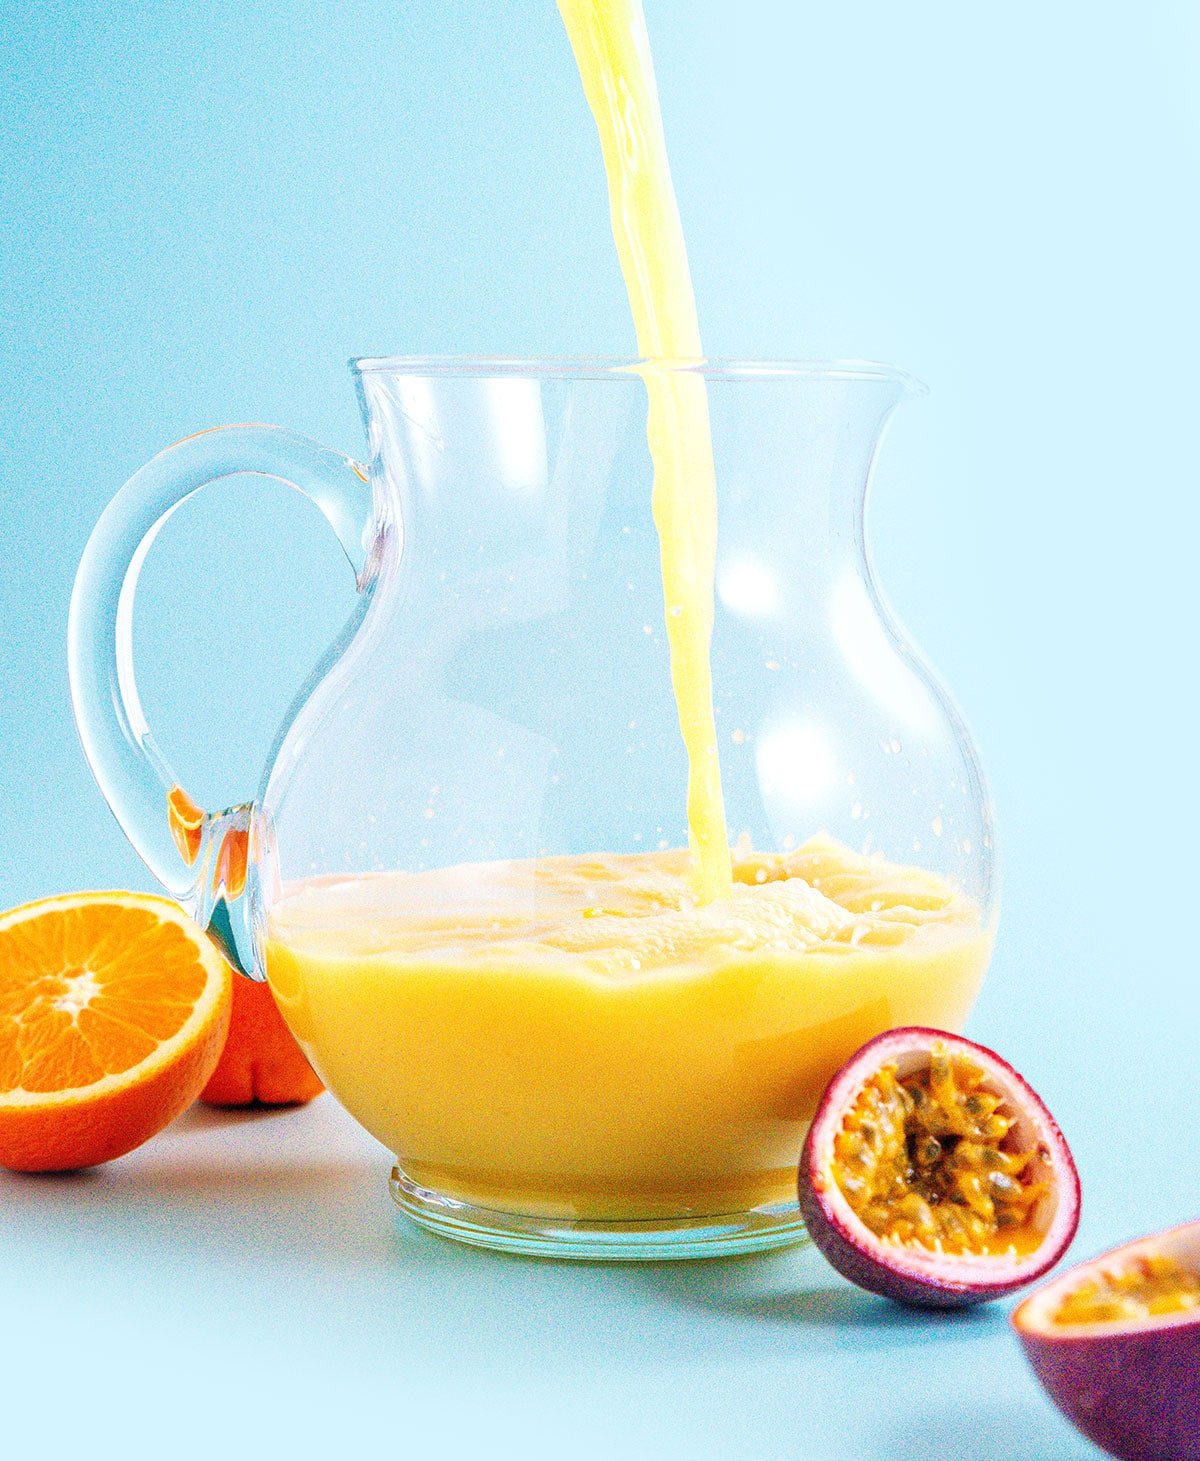 Pouring orange juice into a pitcher with a blue background